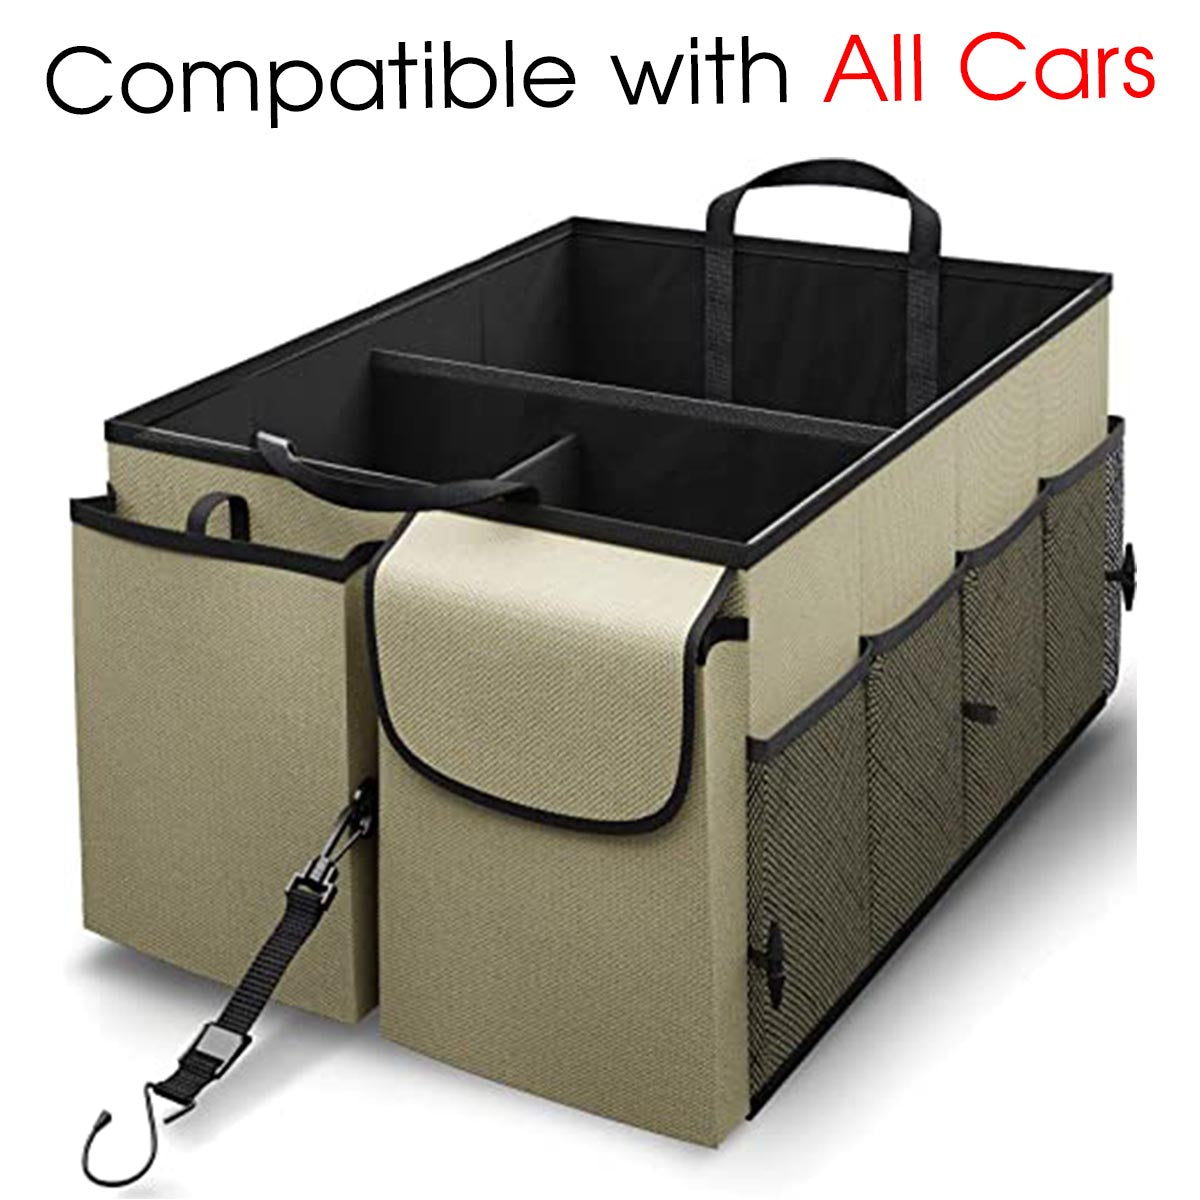 Car Trunk Organizer - Collapsible, Custom fit for All Cars, Multi-Compartment Automotive SUV Car Organizer for Storage w/ Adjustable Straps - Car Accessories for Women and Men HY12993